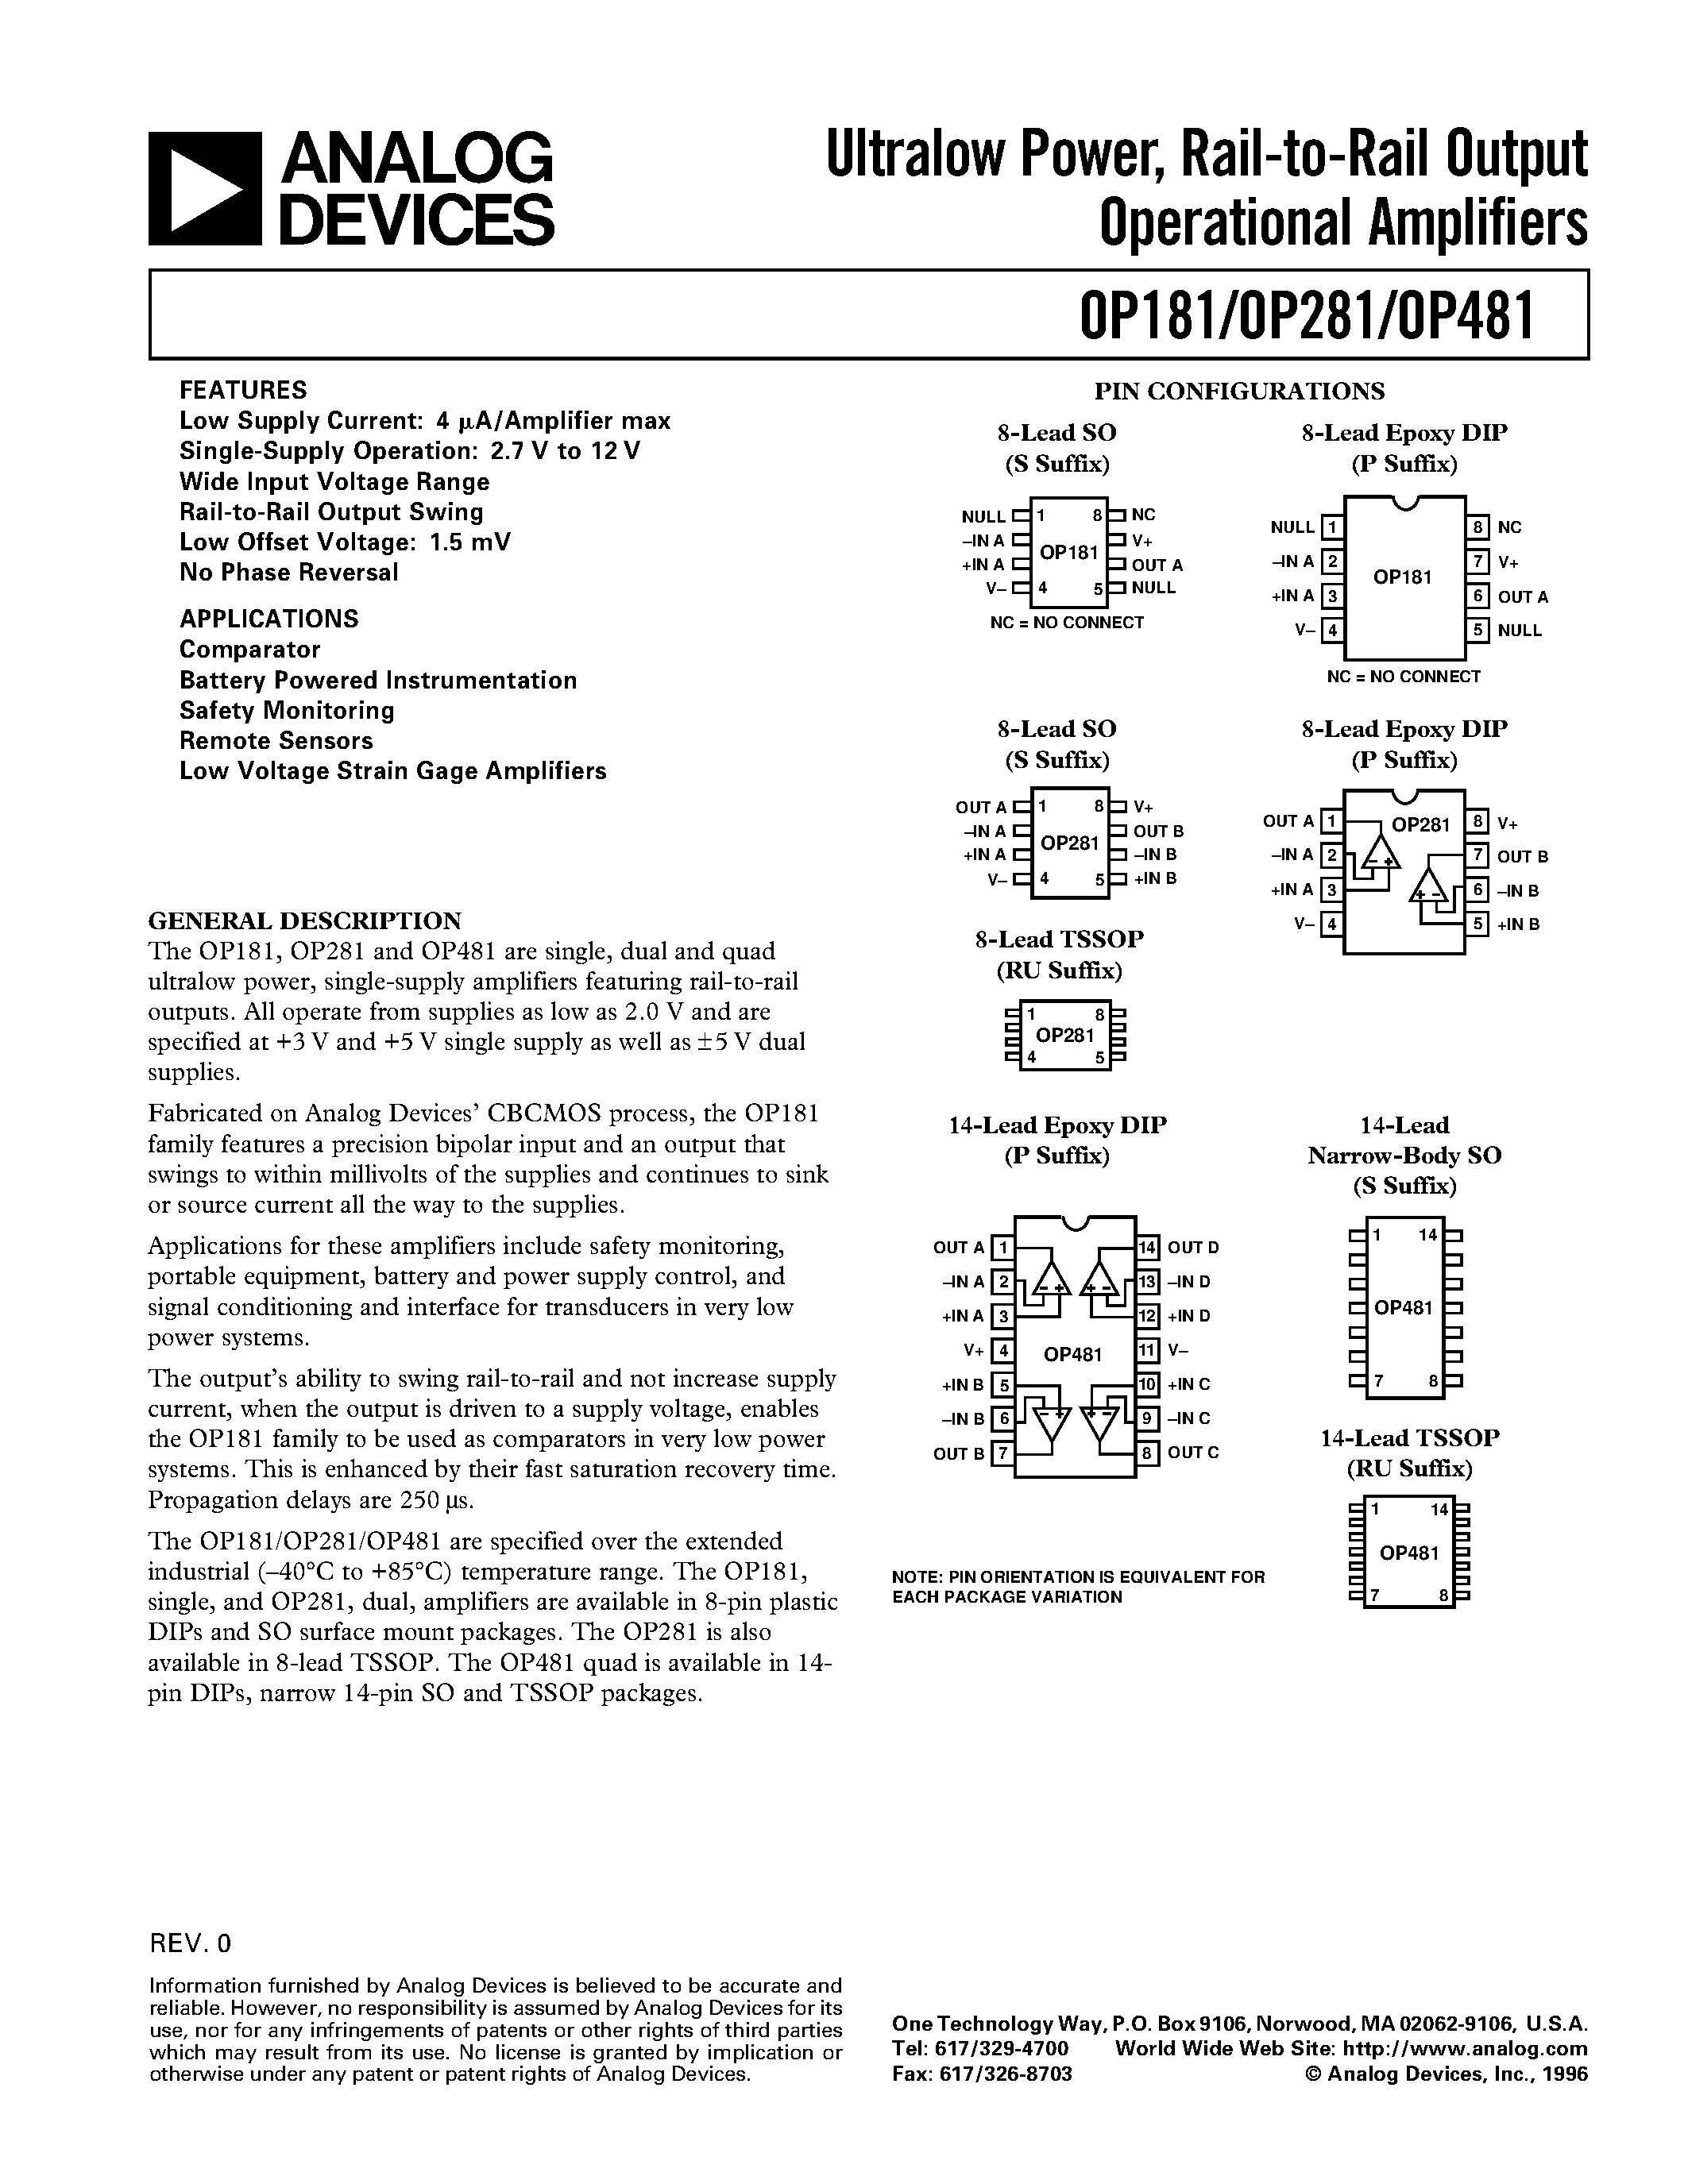 Datasheet OP281 - Ultralow Power / Rail-to-Rail Output Operational Amplifiers page 1